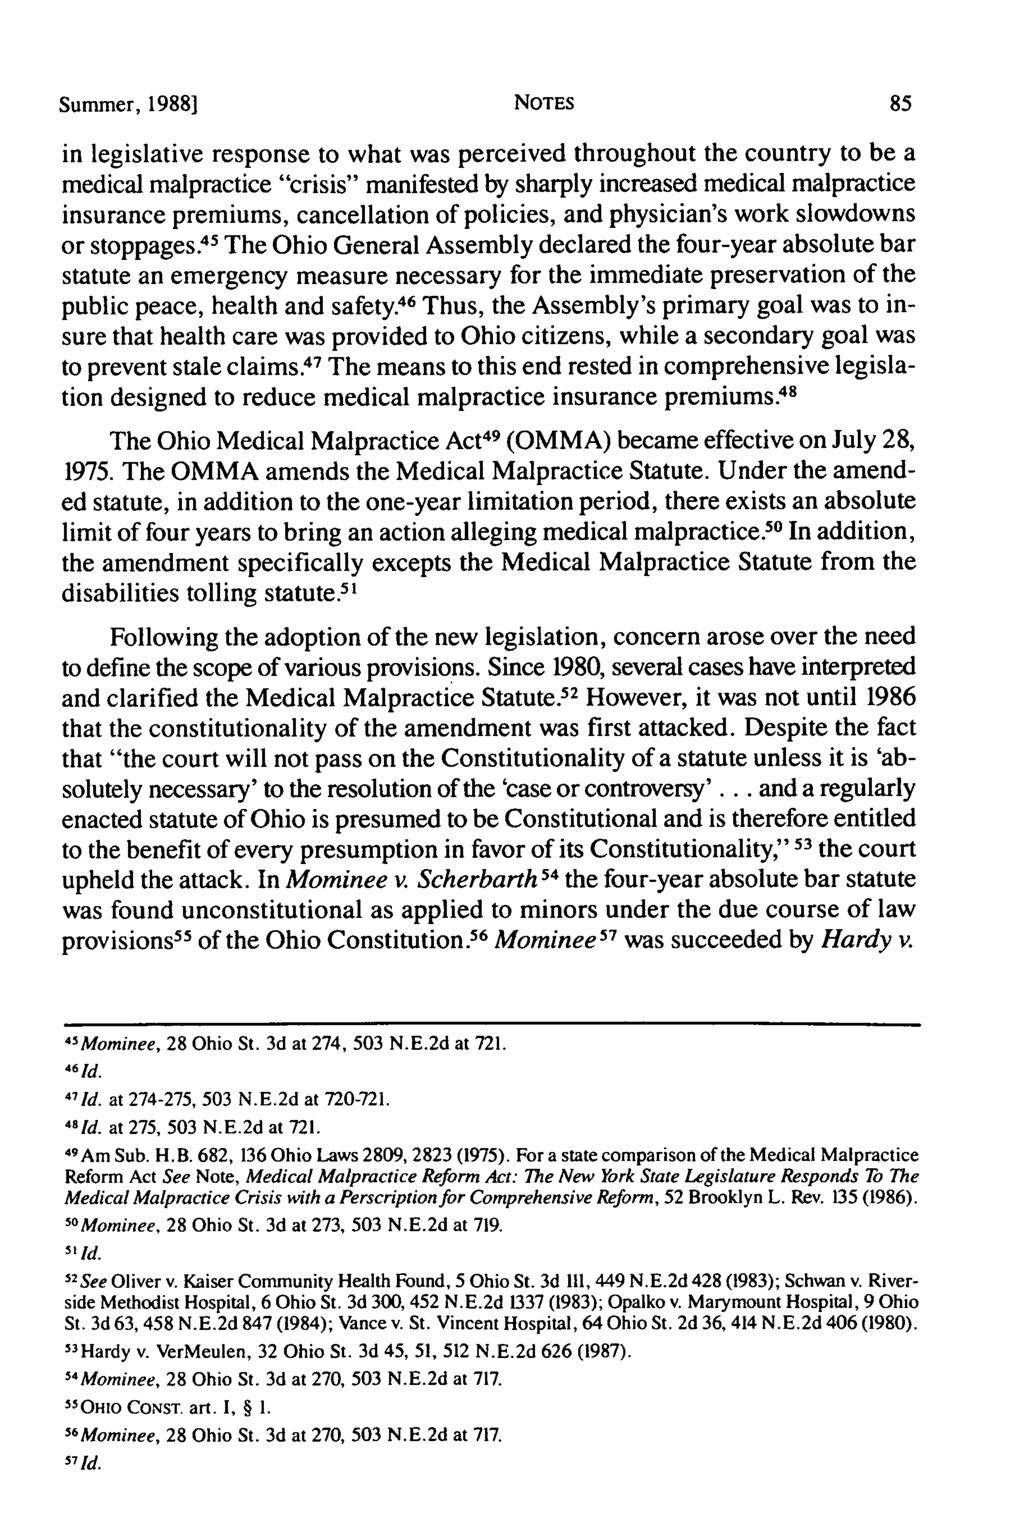 Summer, 1988] NOTES in legislative response to what was perceived throughout the country to be a medical malpractice "crisis" manifested by sharply increased medical malpractice insurance premiums,